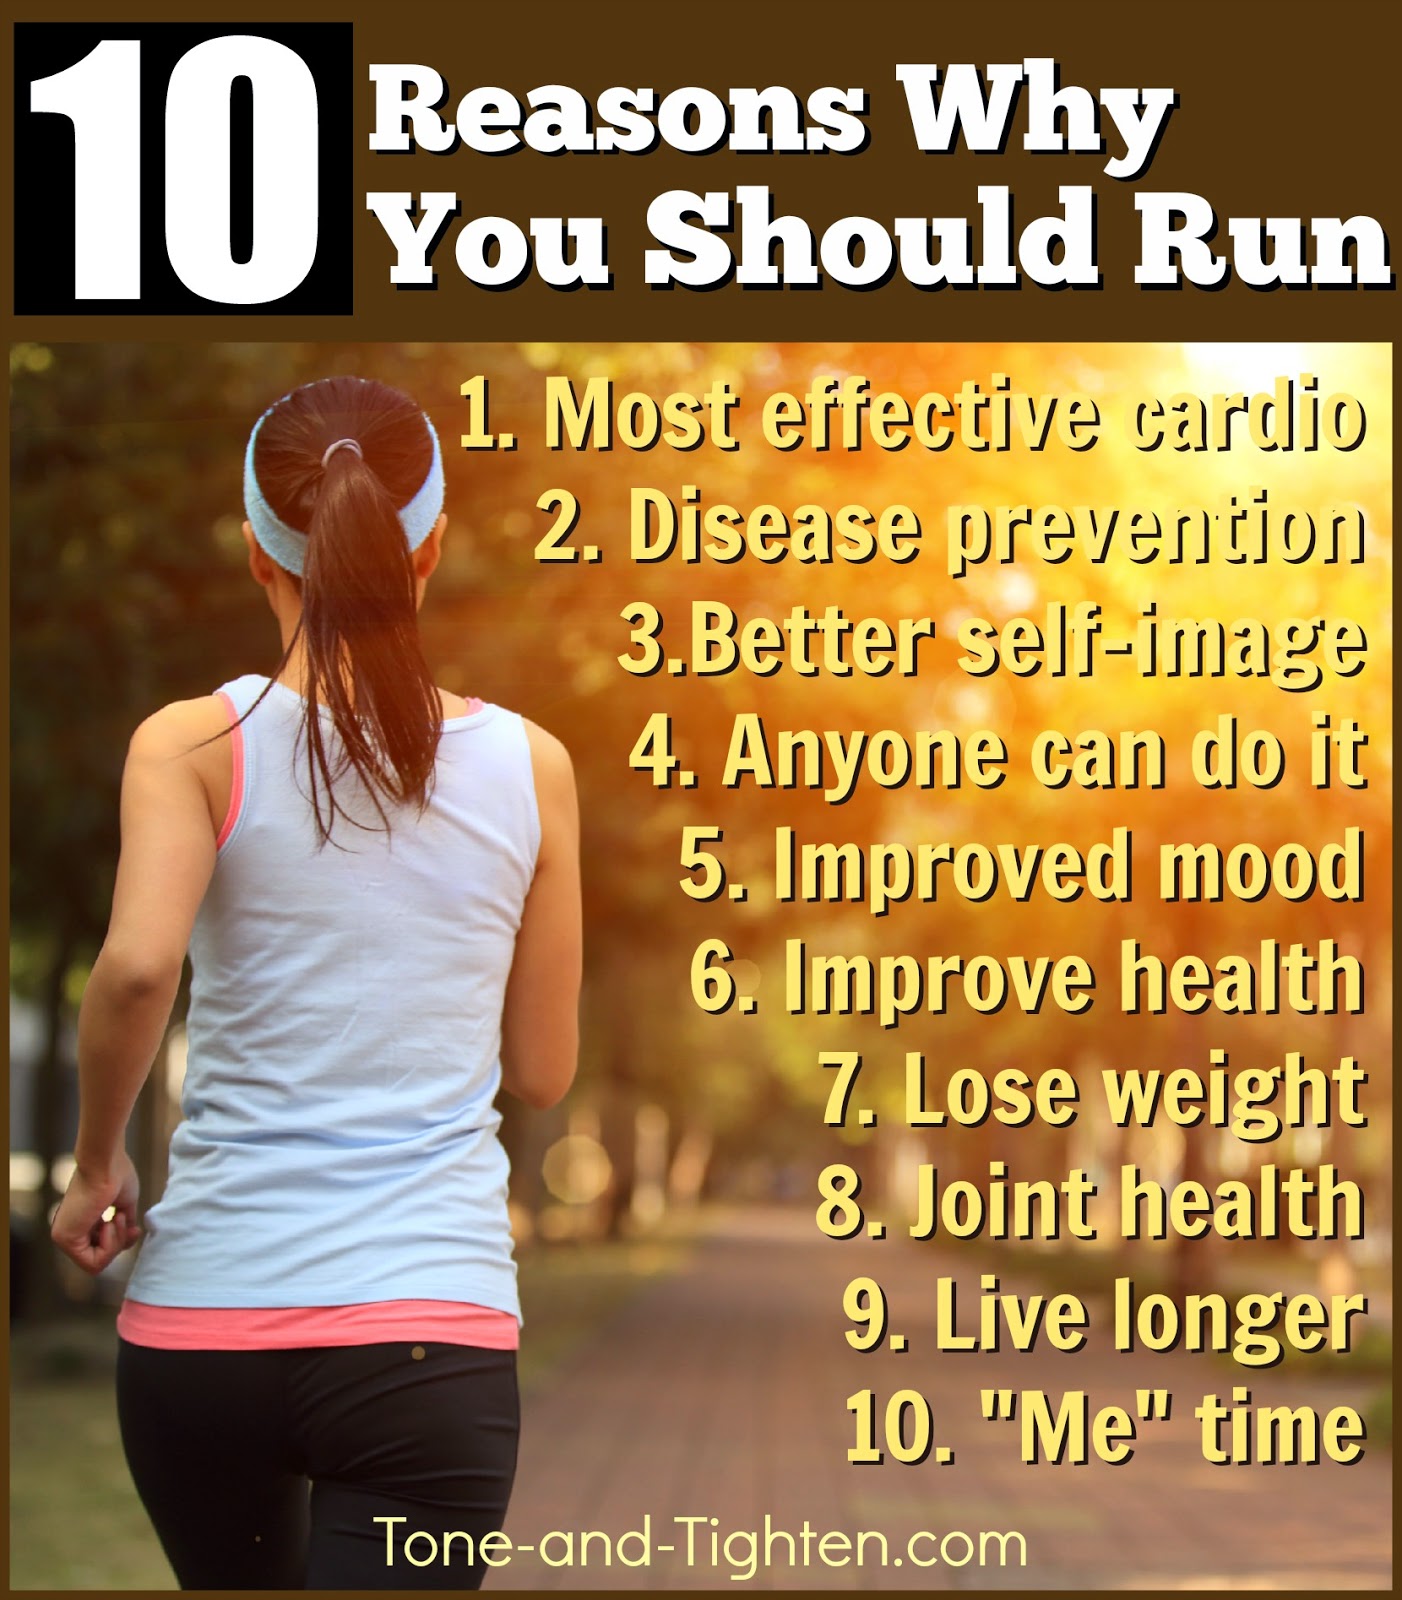 10 Reasons Why You Should Be Running – Best reasons to run from Tone-and-Tighten.com